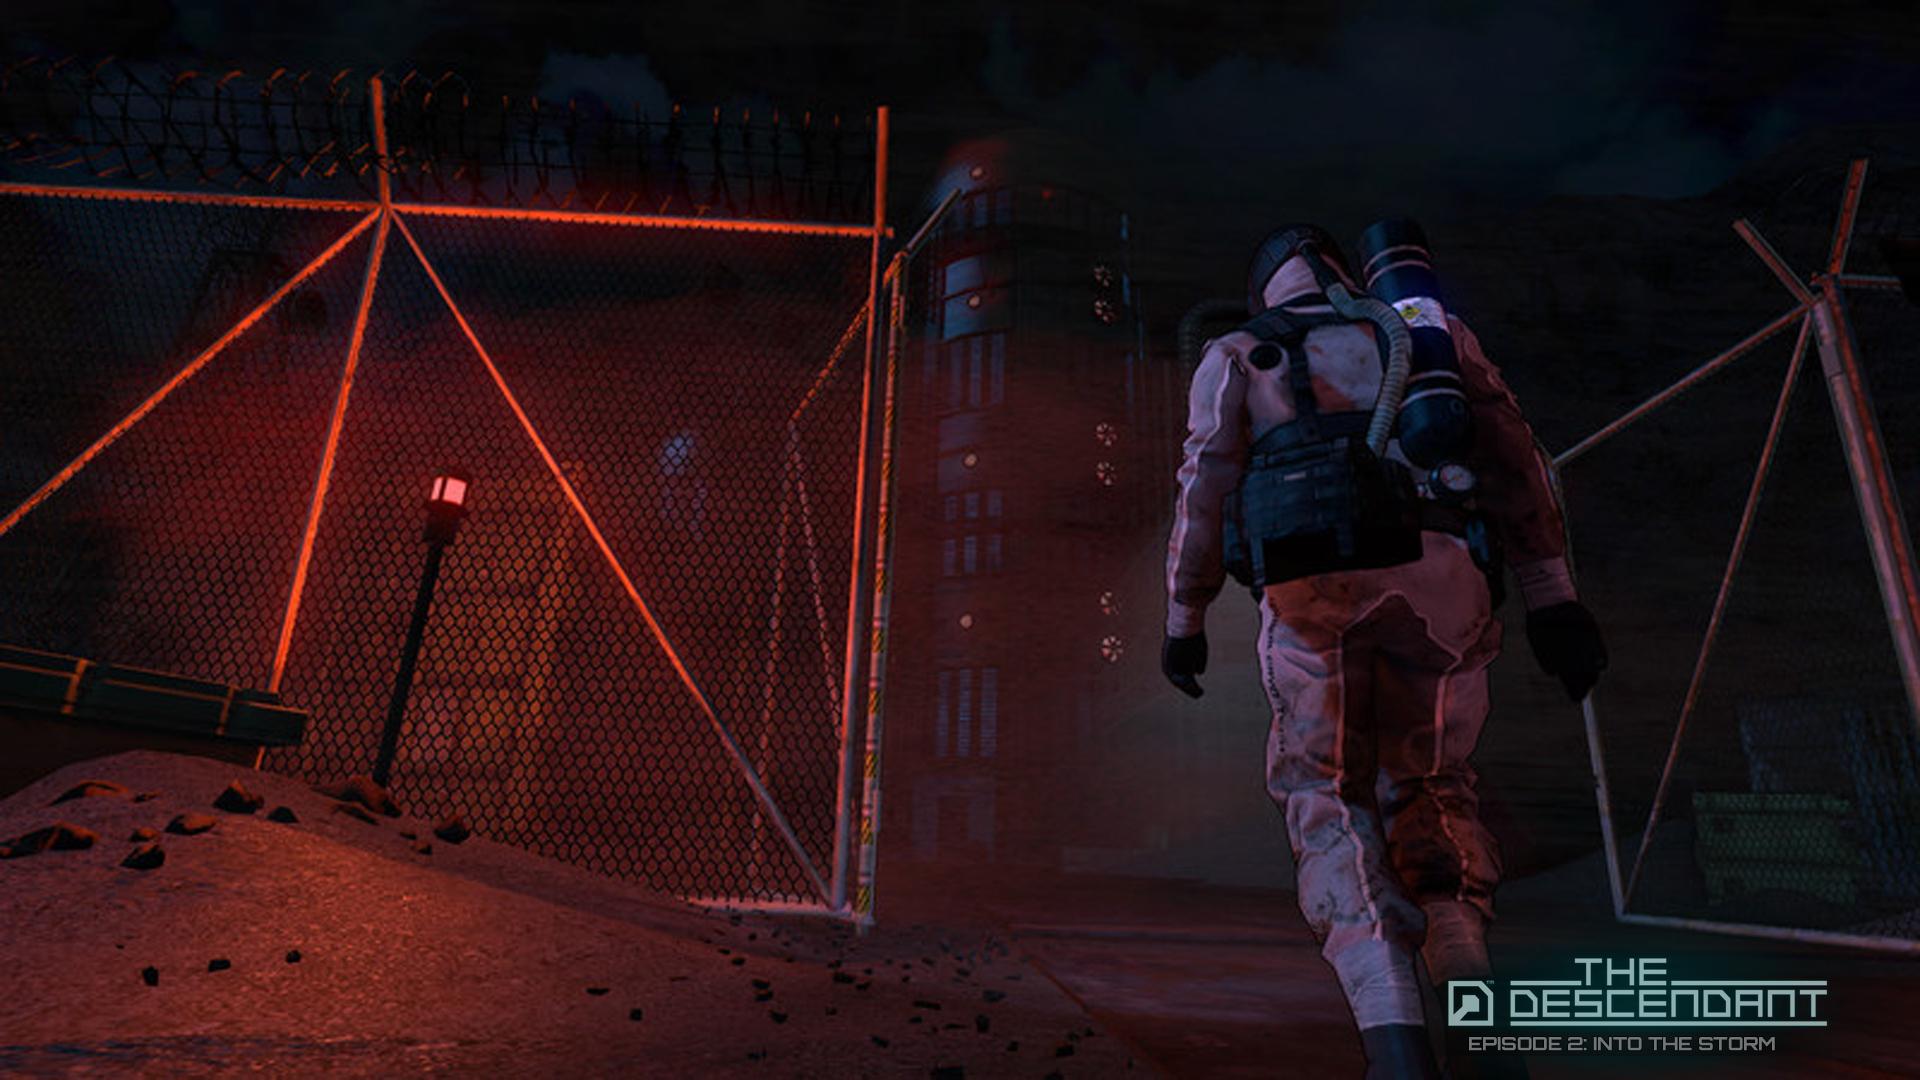 Screenshot №22 from game The Descendant